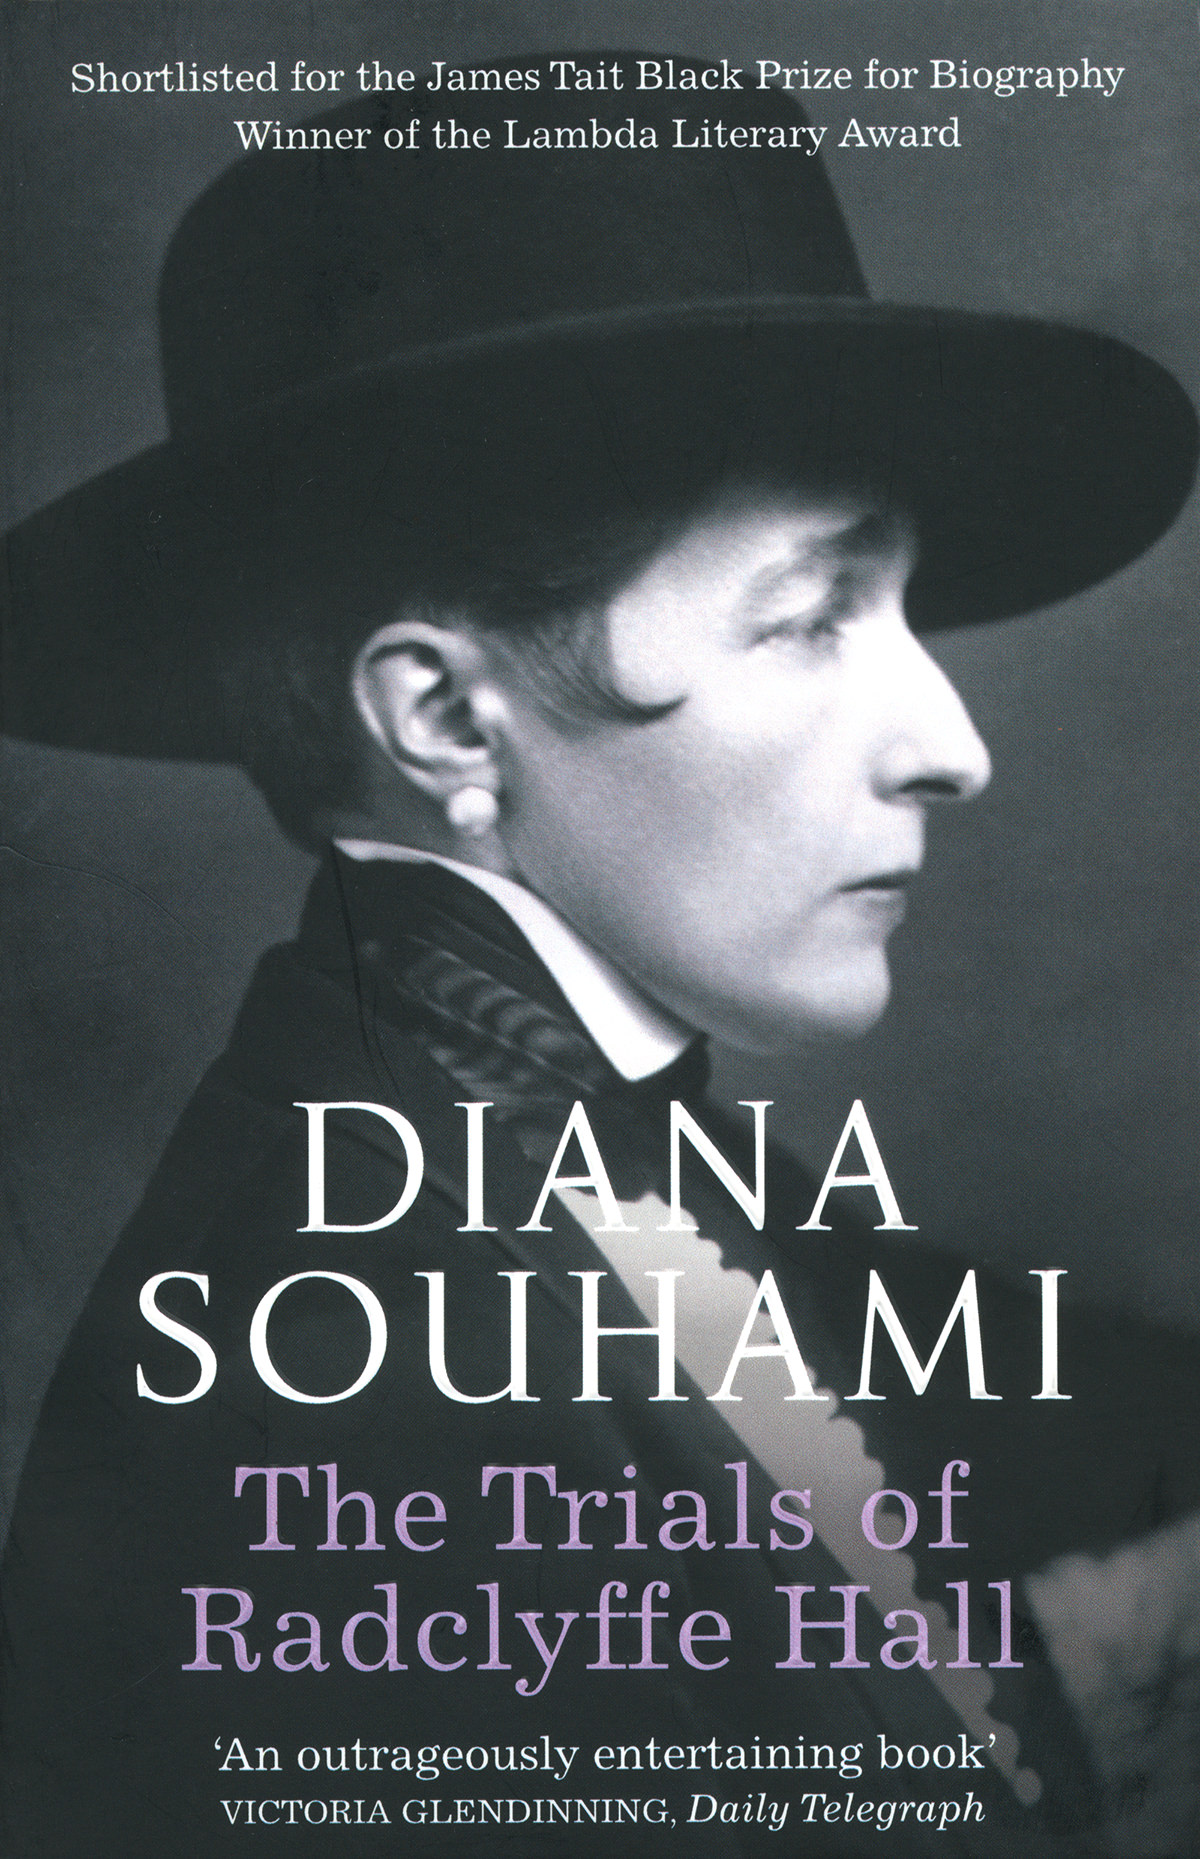 ‘The Trials of Radclyffe Hall’ by Diana Souhami